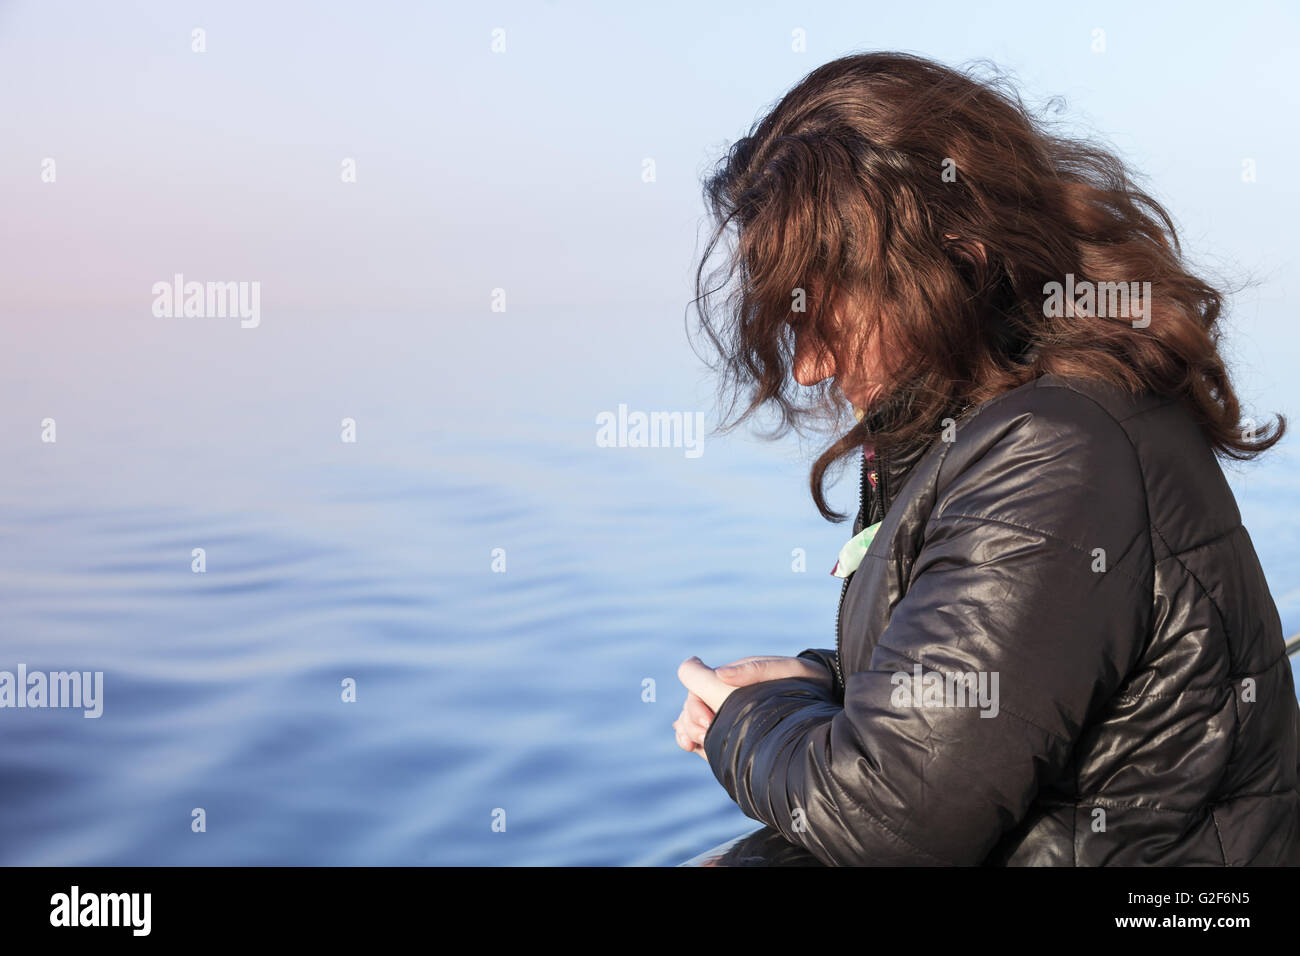 Young Caucasian woman stands on the walking deck of cruise ship, close-up profile portrait Stock Photo